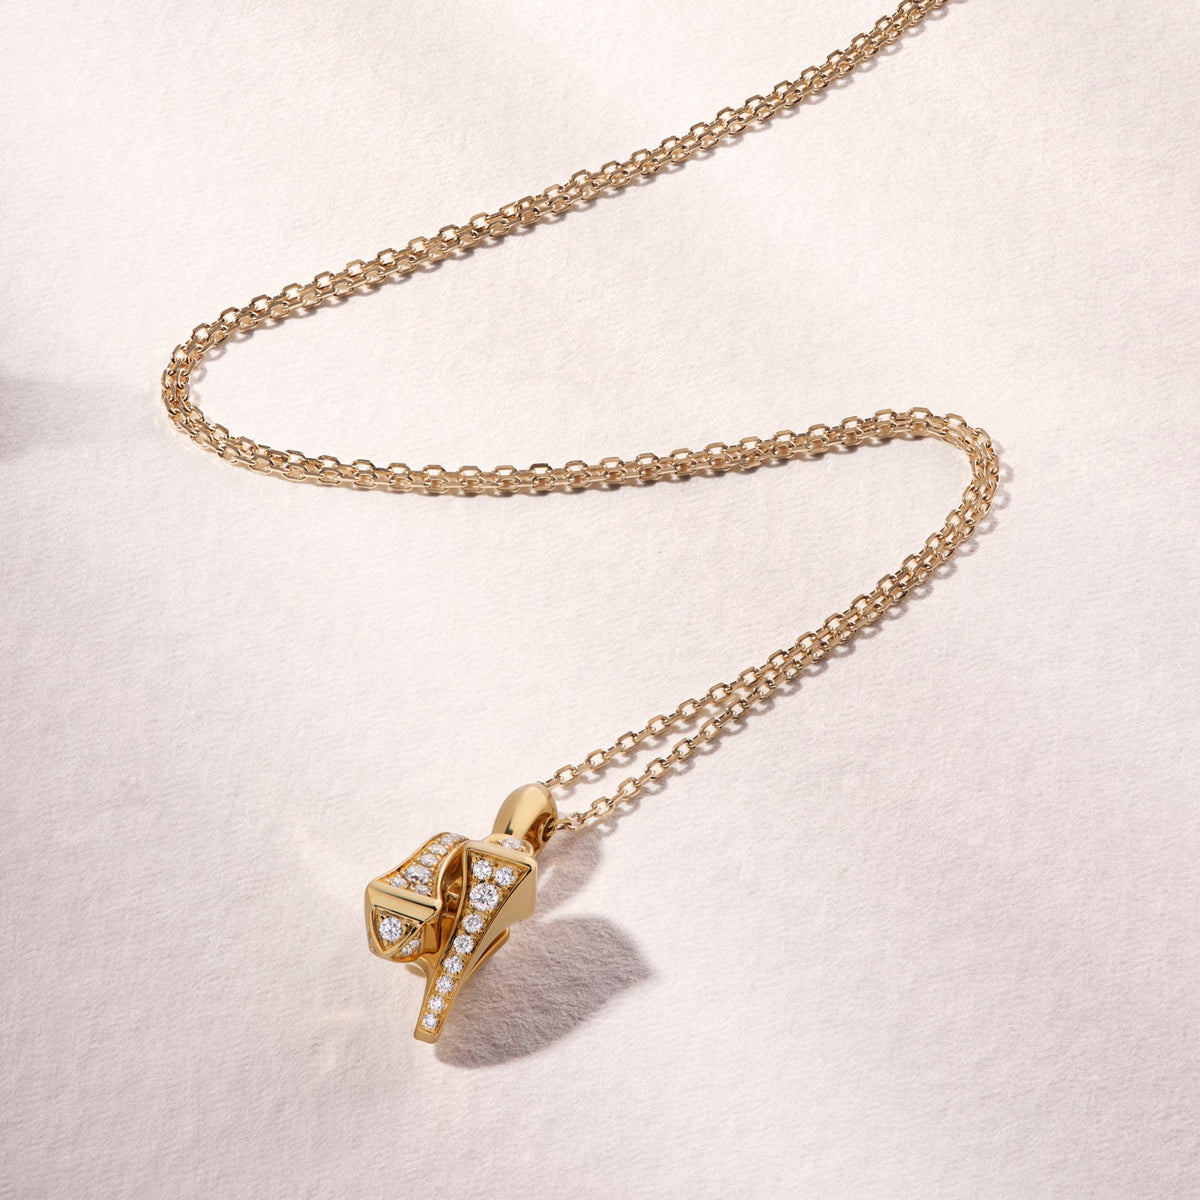 Louis Vuitton North South charm in yellow gold with diamonds